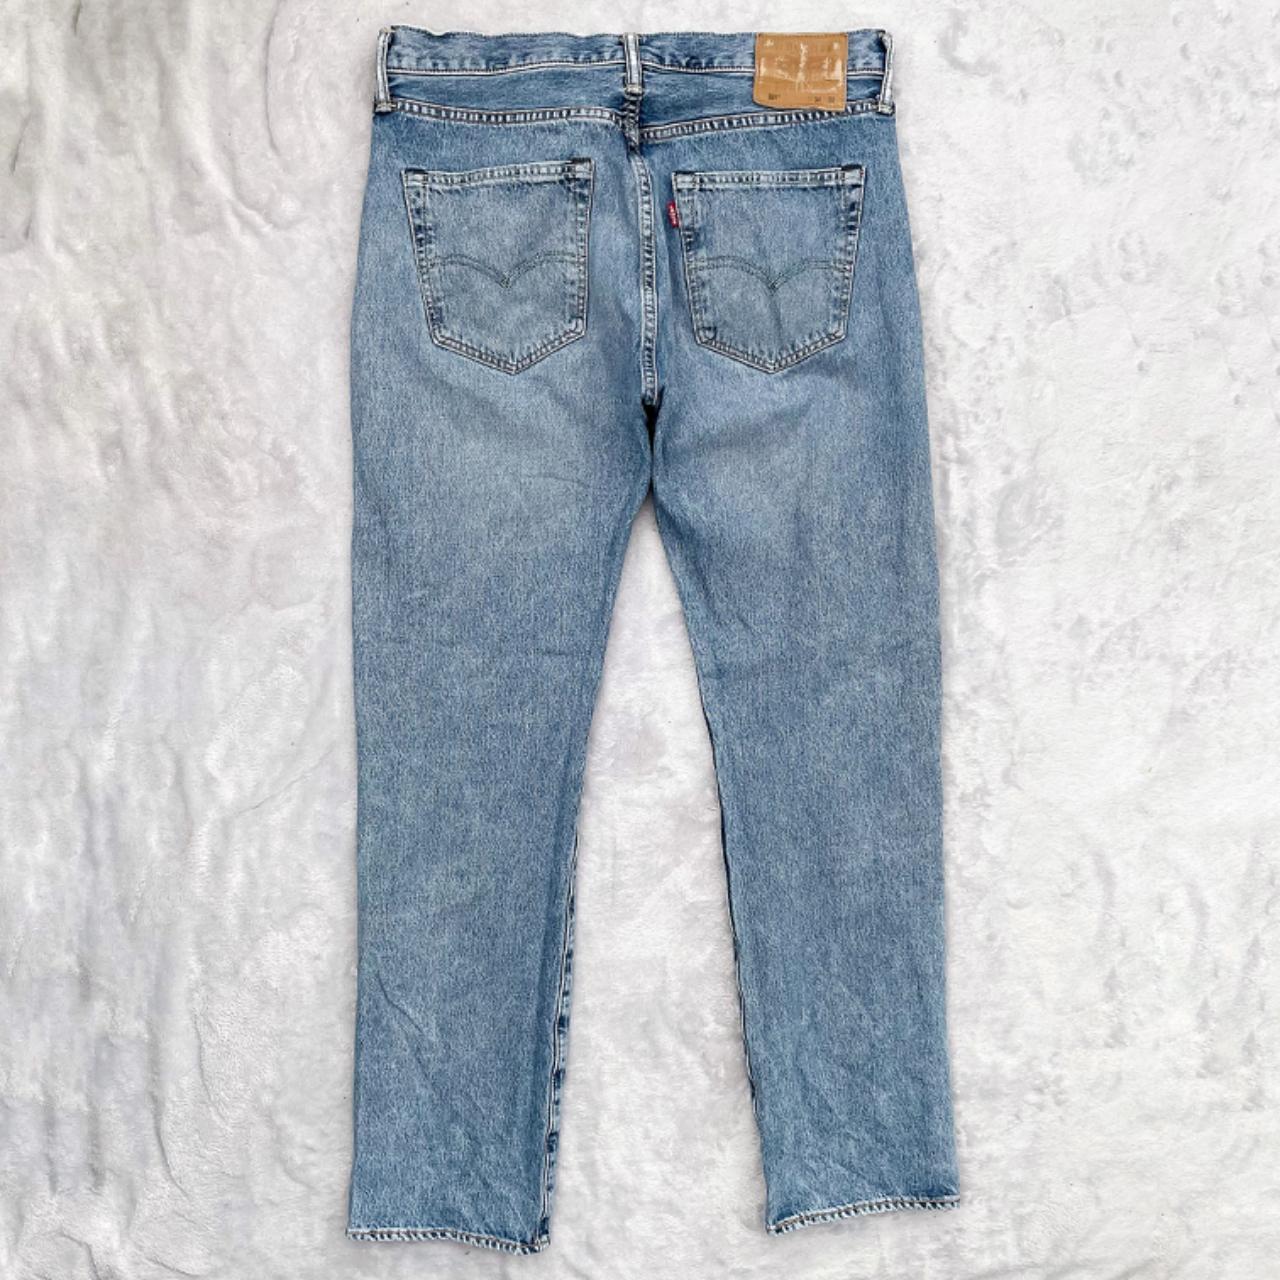 Levi's Circa 1990's 501 Jeans With Natural... - Depop